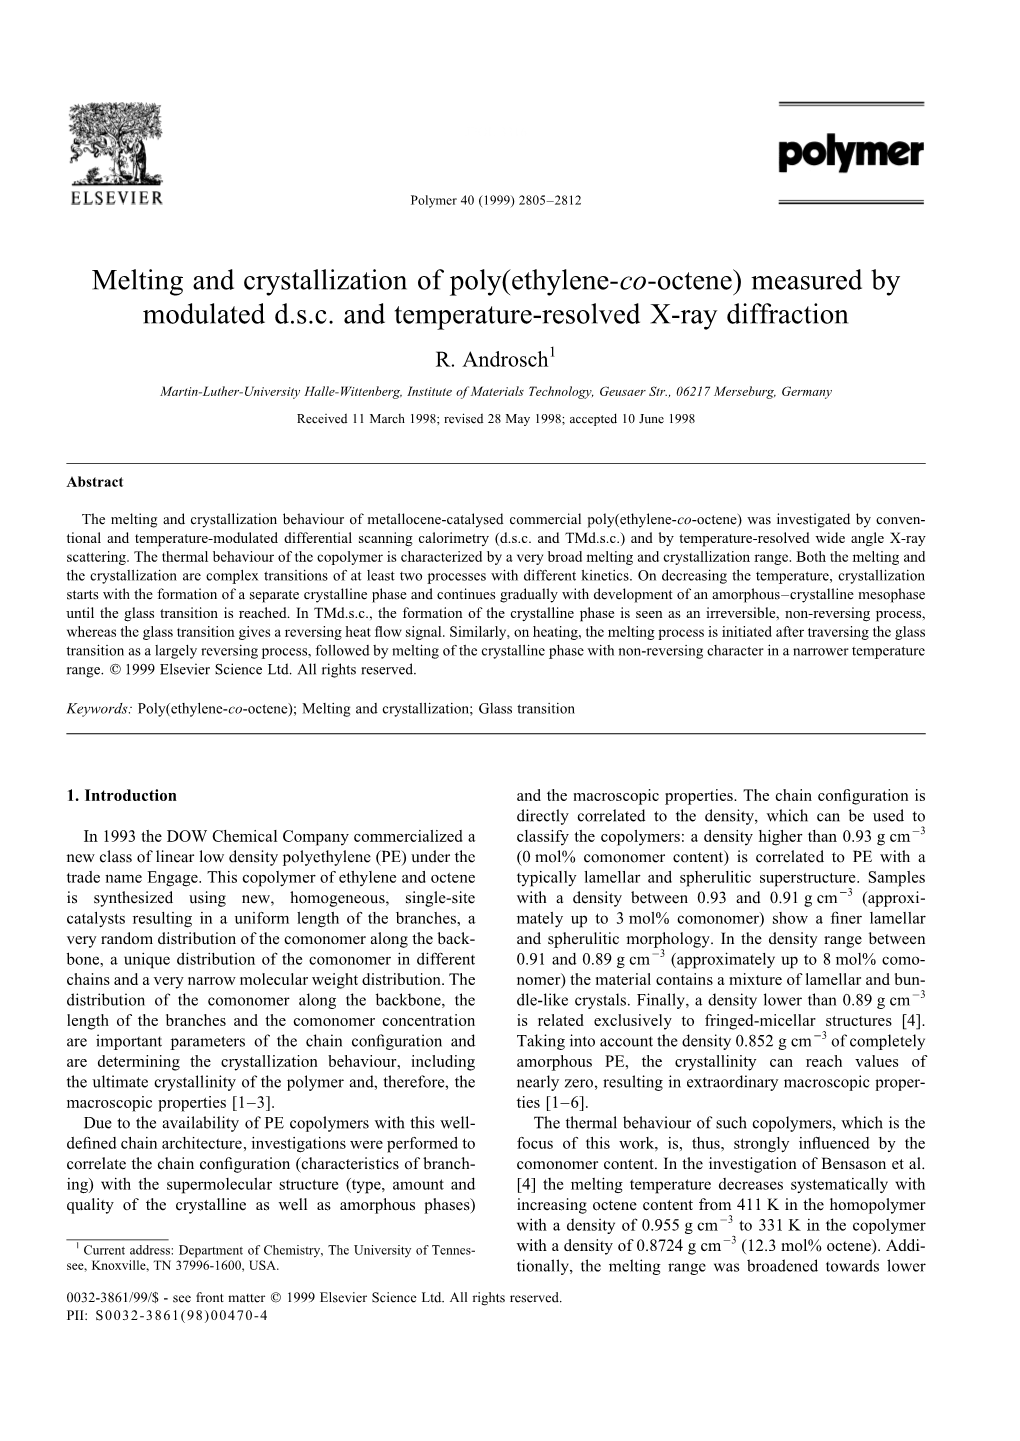 Melting and Crystallization of Poly(Ethylene-Co-Octene) Measured by Modulated D.S.C